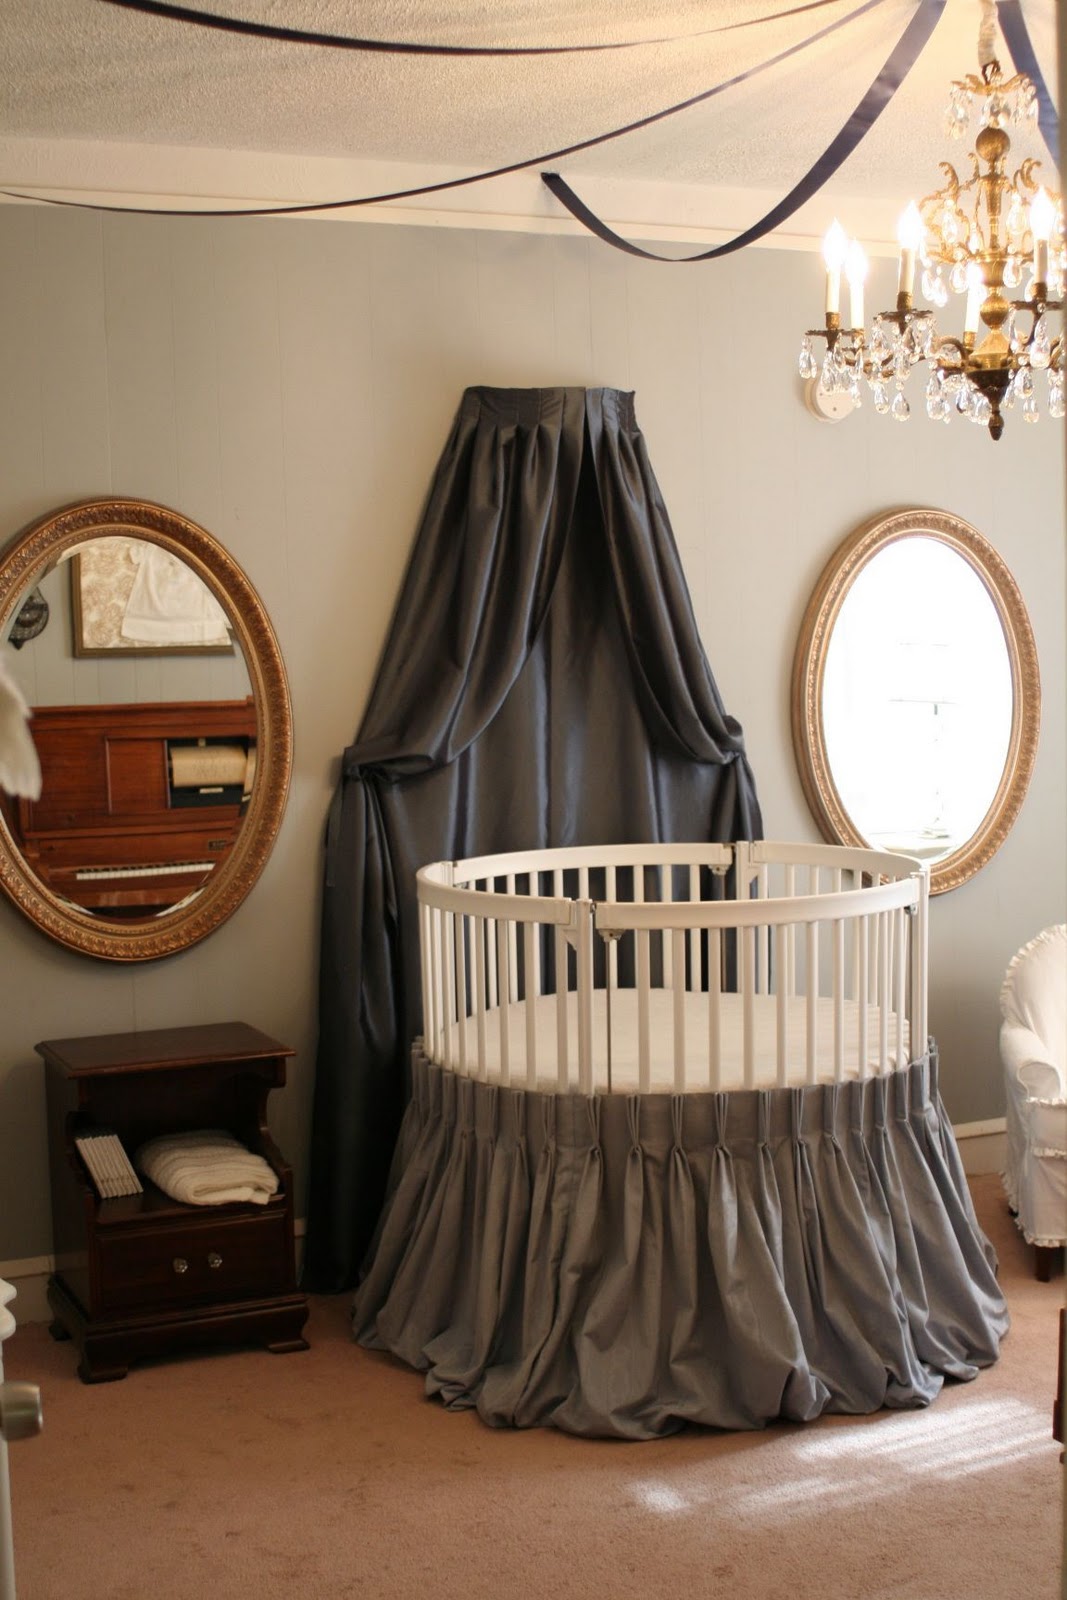 Dark Grey Installed Luxurious Dark Grey Canopy Curtain Installed On Wall To Match Round Crib With Grey Skirt Covering The Legs Kids Room Adorable Round Crib Decorated By Vintage Ornaments In Small Room